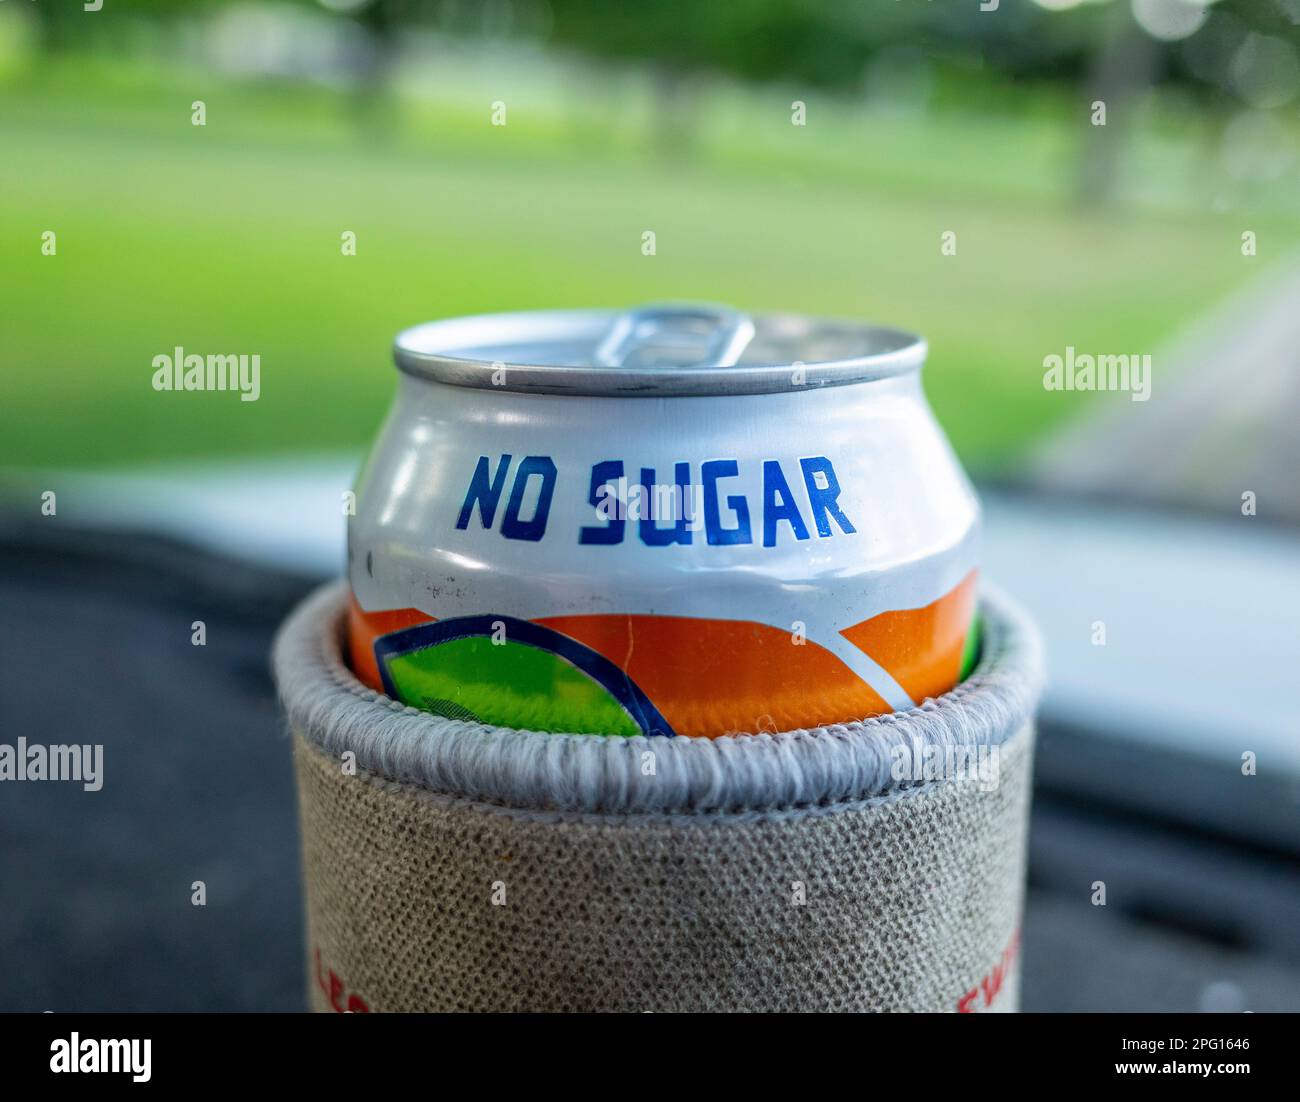 https://c8.alamy.com/comp/2PG1646/can-of-soda-with-no-sugar-clearly-signed-in-a-cooler-2PG1646.jpg